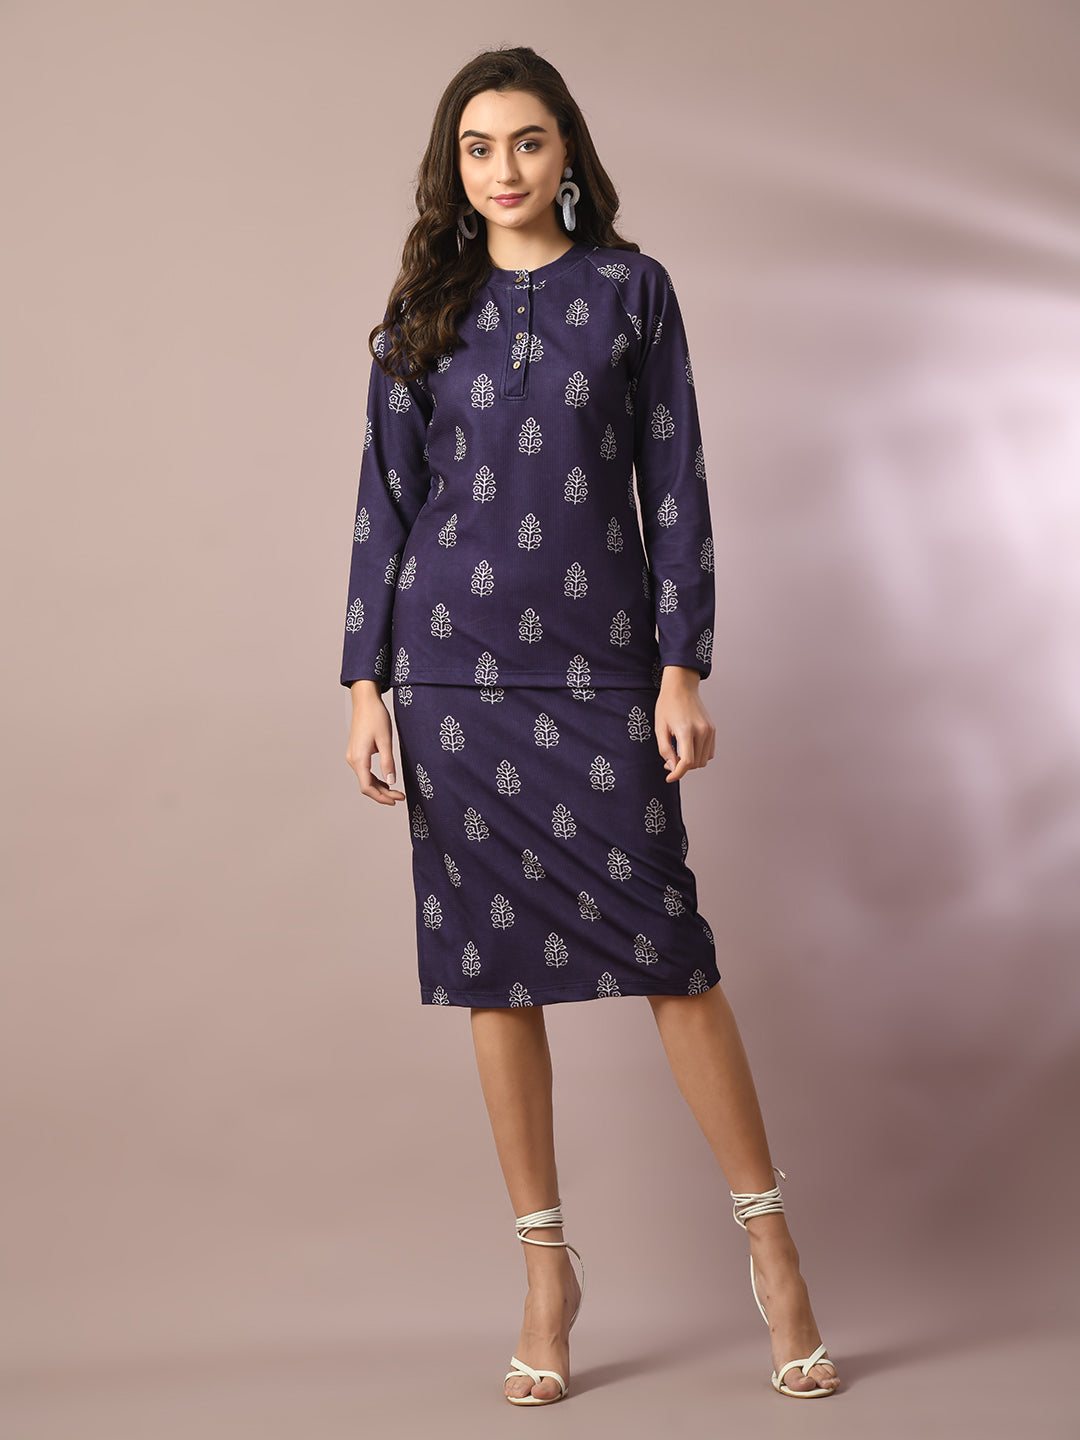 Women's  Navy Blue Printed Round Neck Party Top With Skirt Co-Ord Set  - Myshka